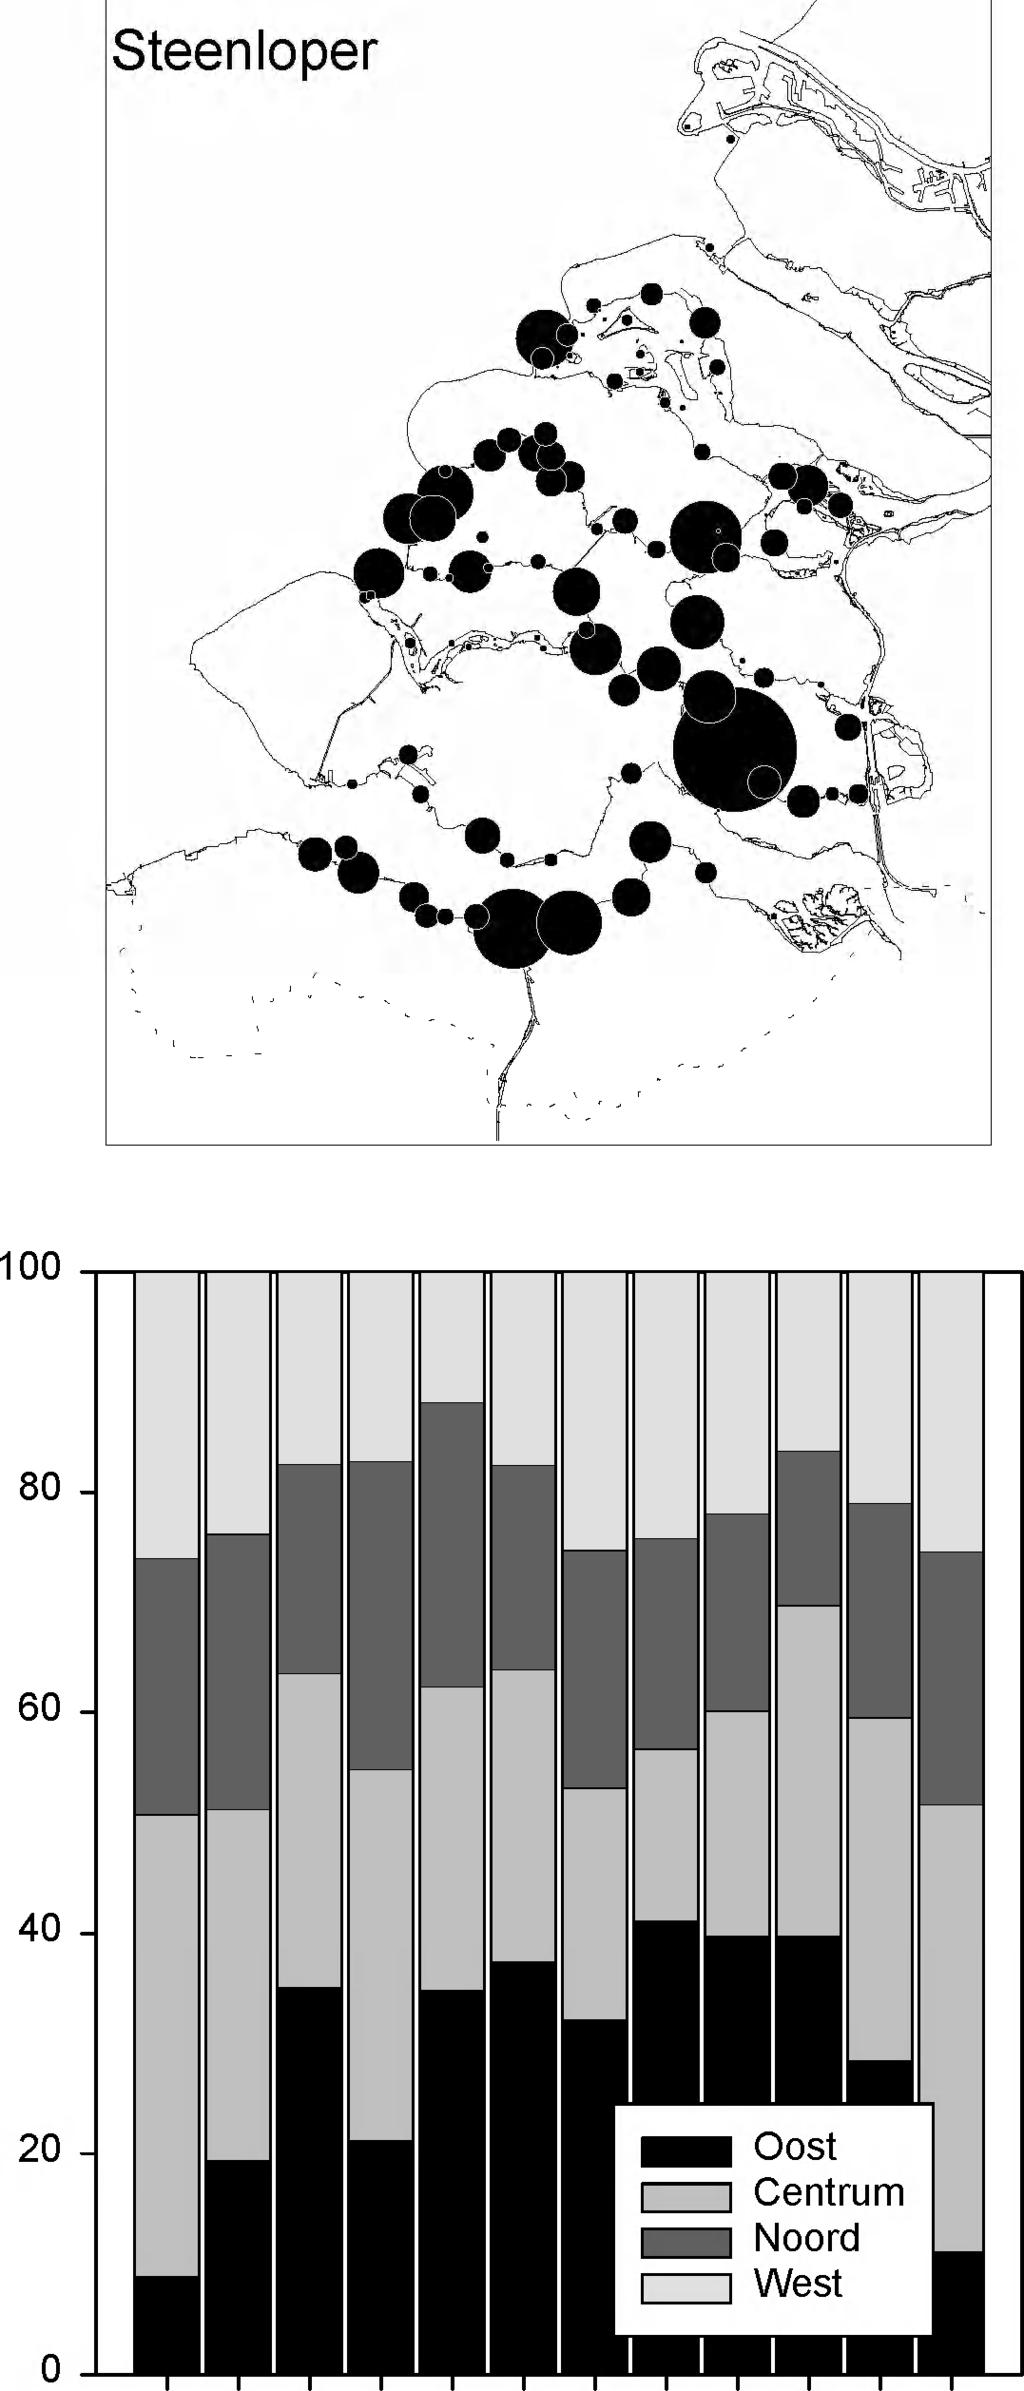 Distribution in 2000/2001 (upper-left), numbers in 2000/2001 (upper-right), distribution o f